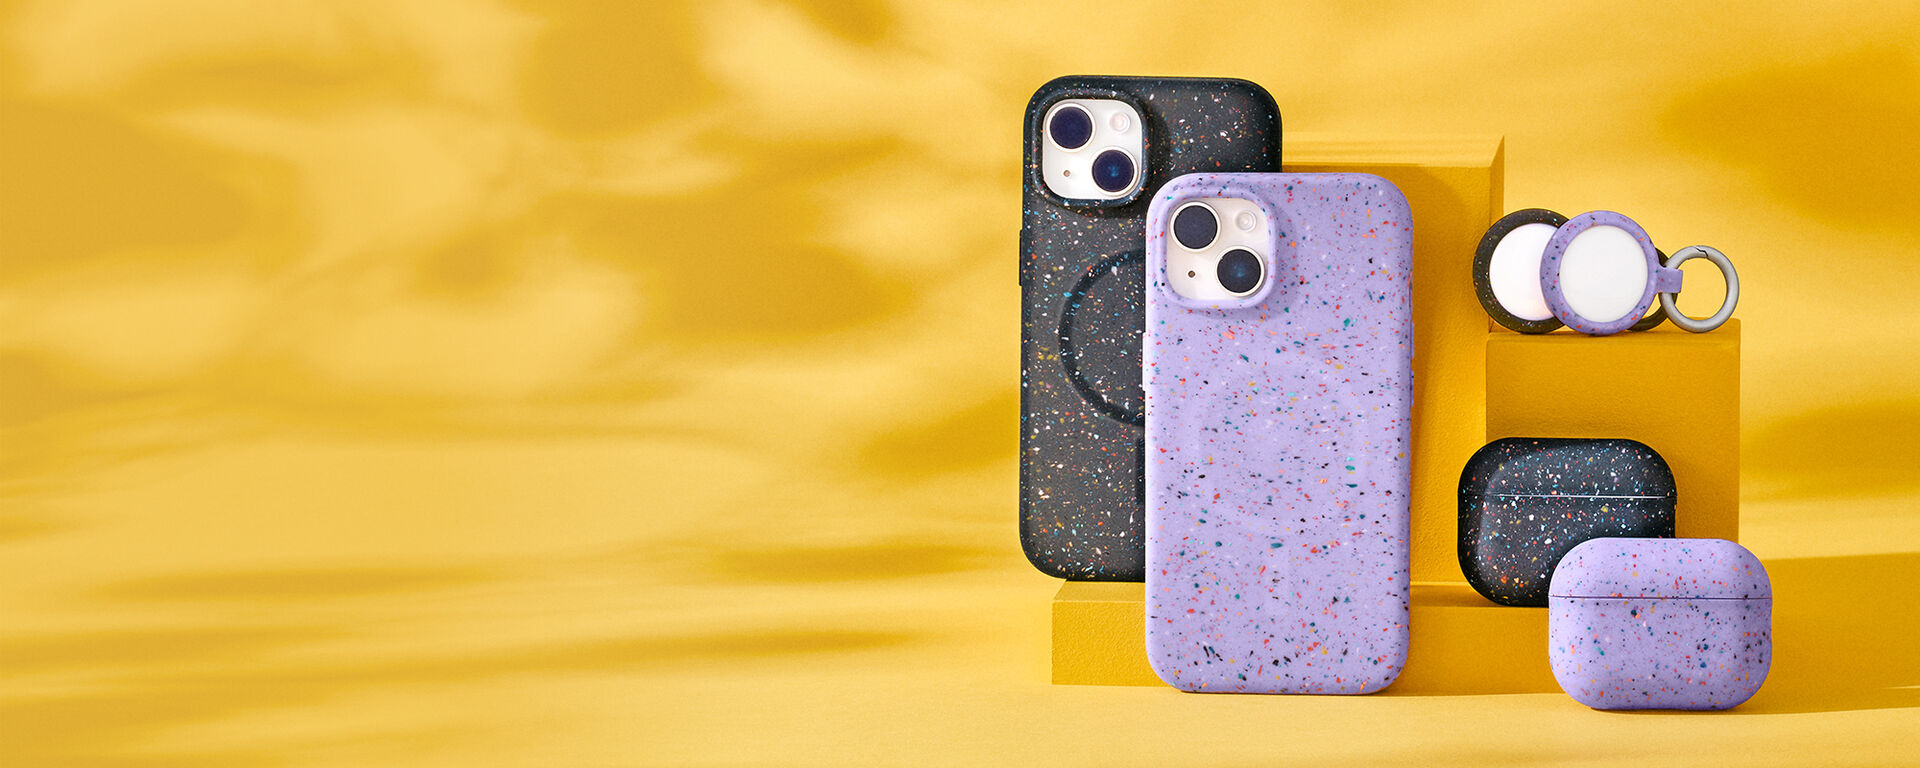 sustainable iPhone cases, Airpod cases, airtag cases